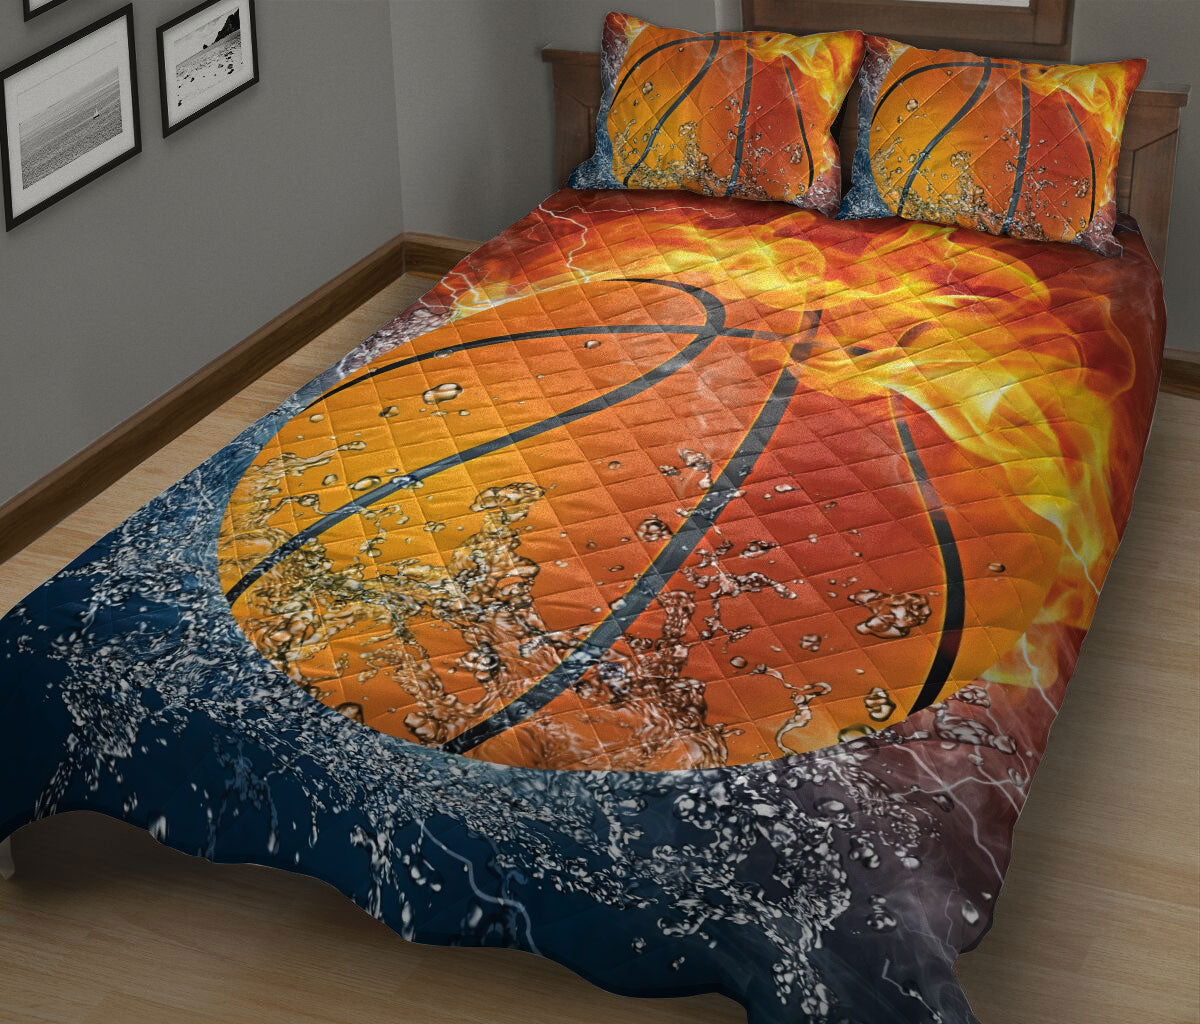 Ohaprints-Quilt-Bed-Set-Pillowcase-Basketball-Ball-Fire-&-Water-Unique-Gift-For-Sports-Lover-Men-Women-Kids-Blanket-Bedspread-Bedding-2014-King (90'' x 100'')